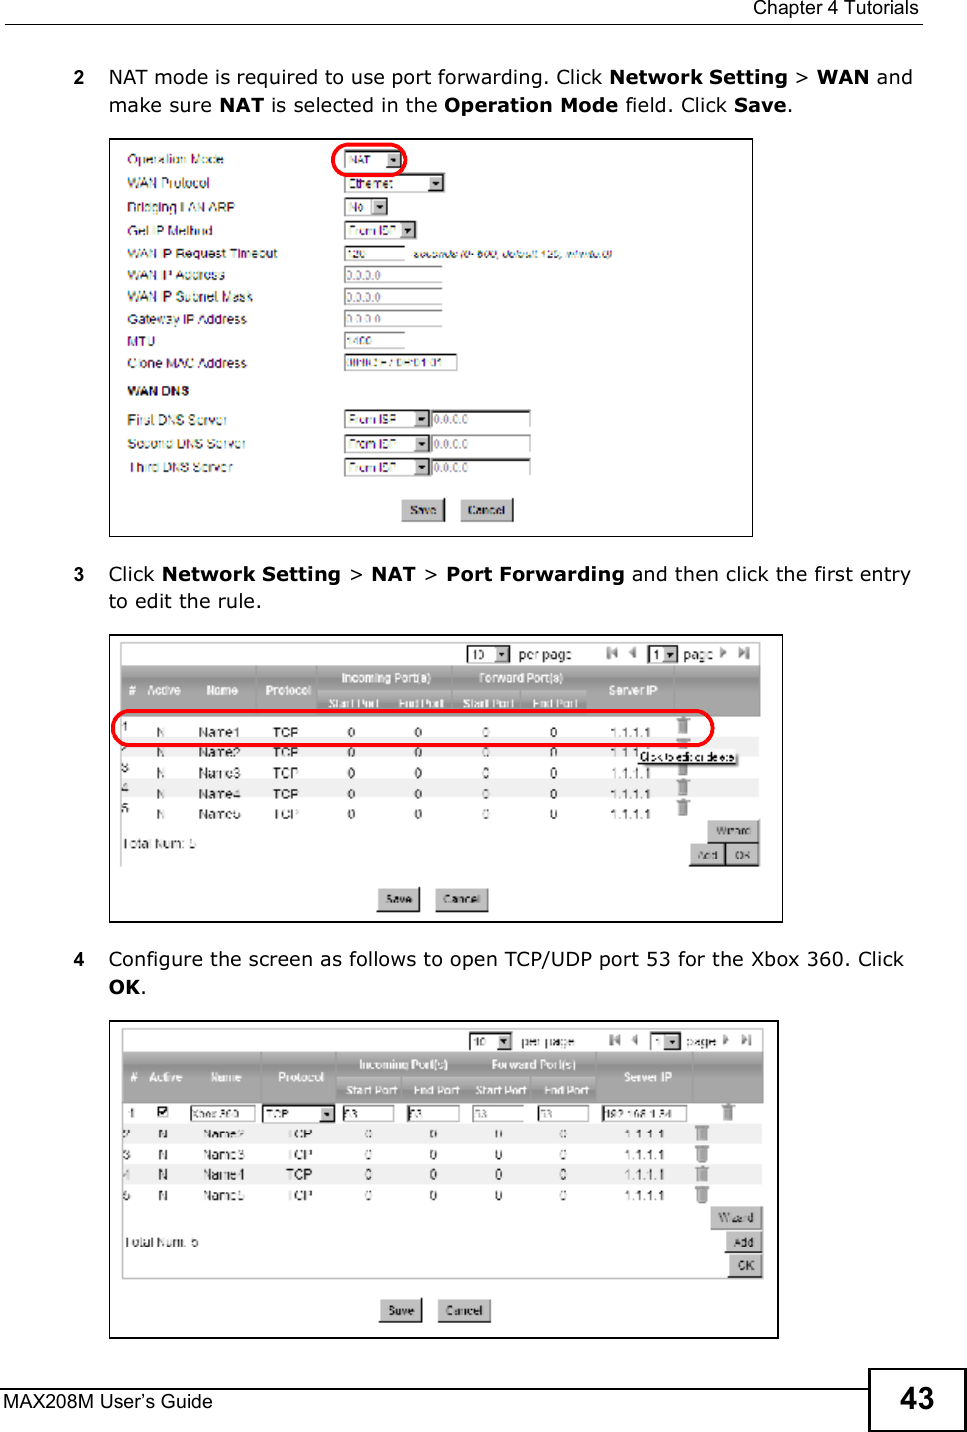  Chapter 4TutorialsMAX208M User s Guide 432NAT mode is required to use port forwarding. Click Network Setting &gt; WAN and make sure NAT is selected in the Operation Mode field. Click Save.3Click Network Setting &gt; NAT &gt; Port Forwarding and then click the first entry to edit the rule.4Configure the screen as follows to open TCP/UDP port 53 for the Xbox 360. Click OK.